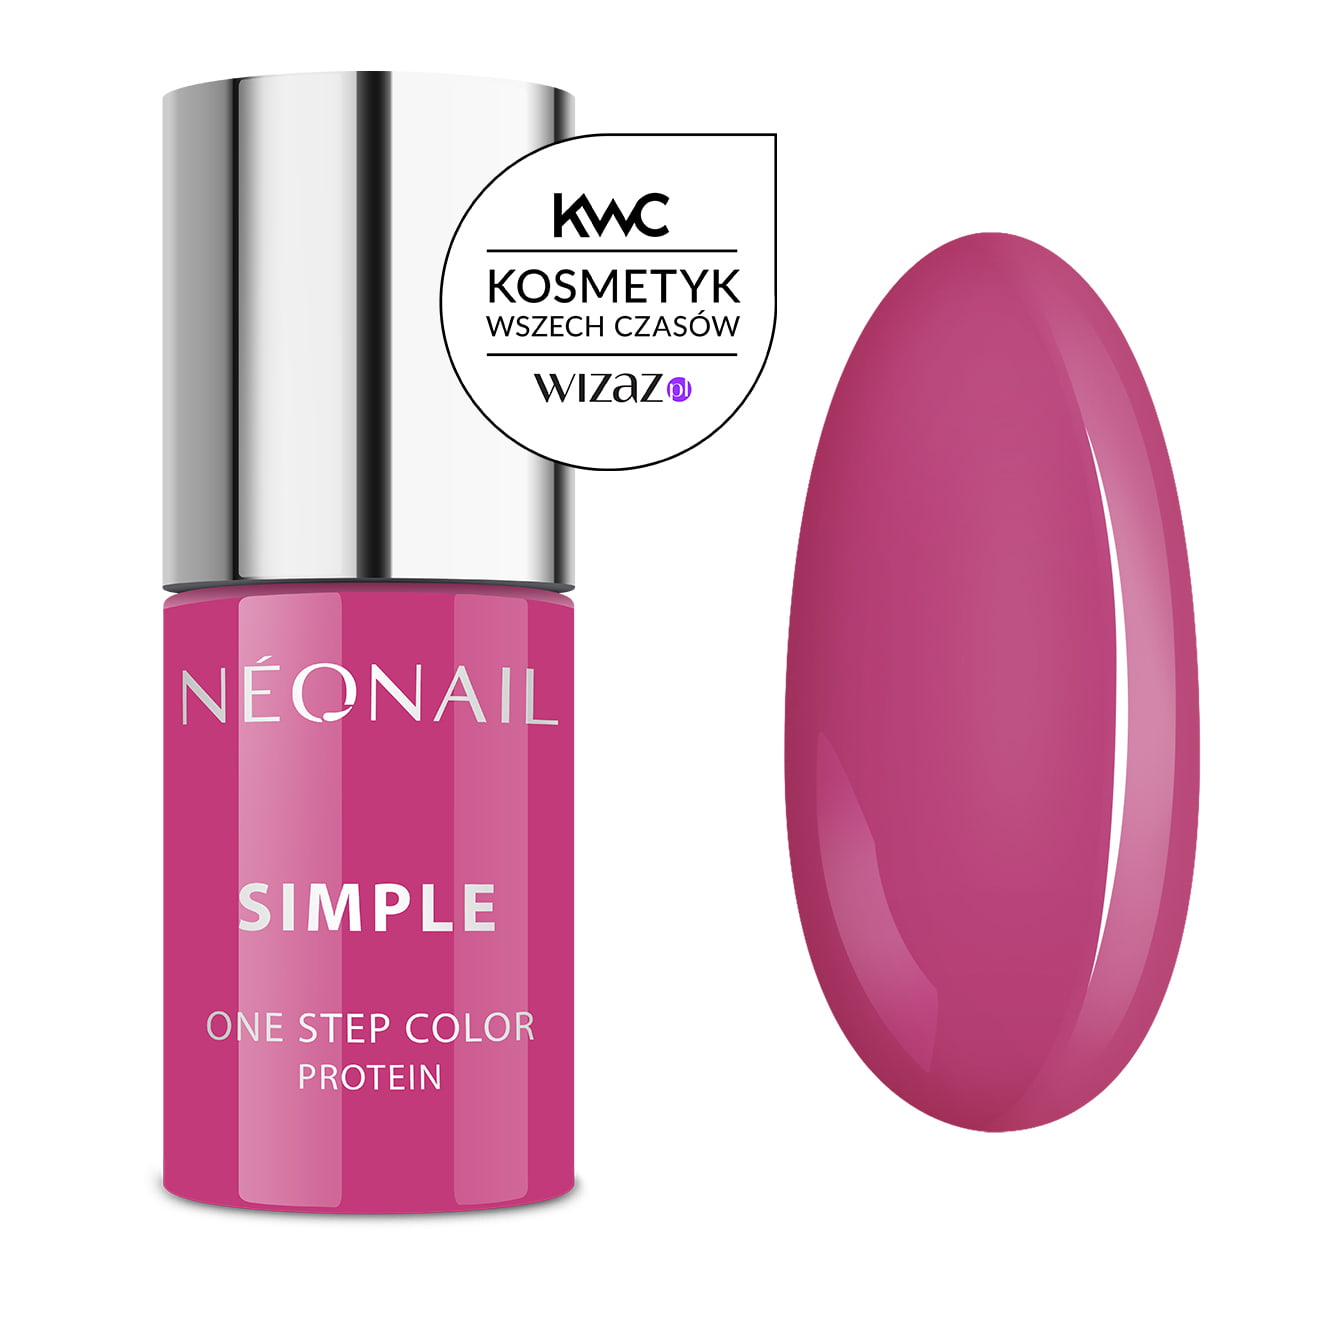 NeoNail Simple One Step Color Protein 7,2ml - Vernal